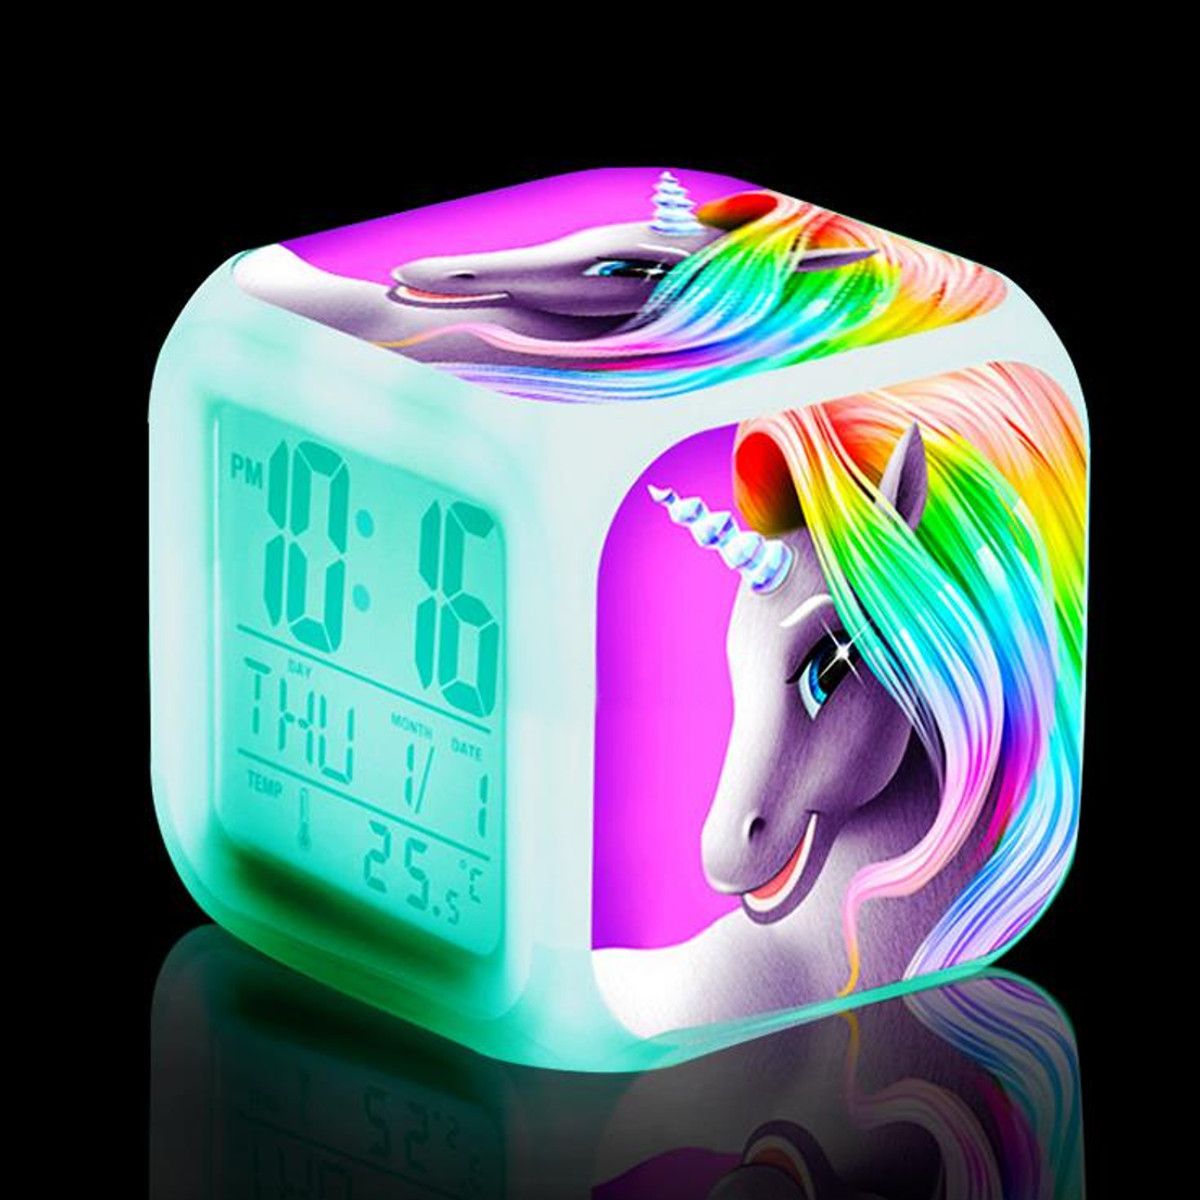 7-Colors-Changing-Unicorn-LED-Digital-Alarm-Clock-Thermometer-Date-Time-1631833